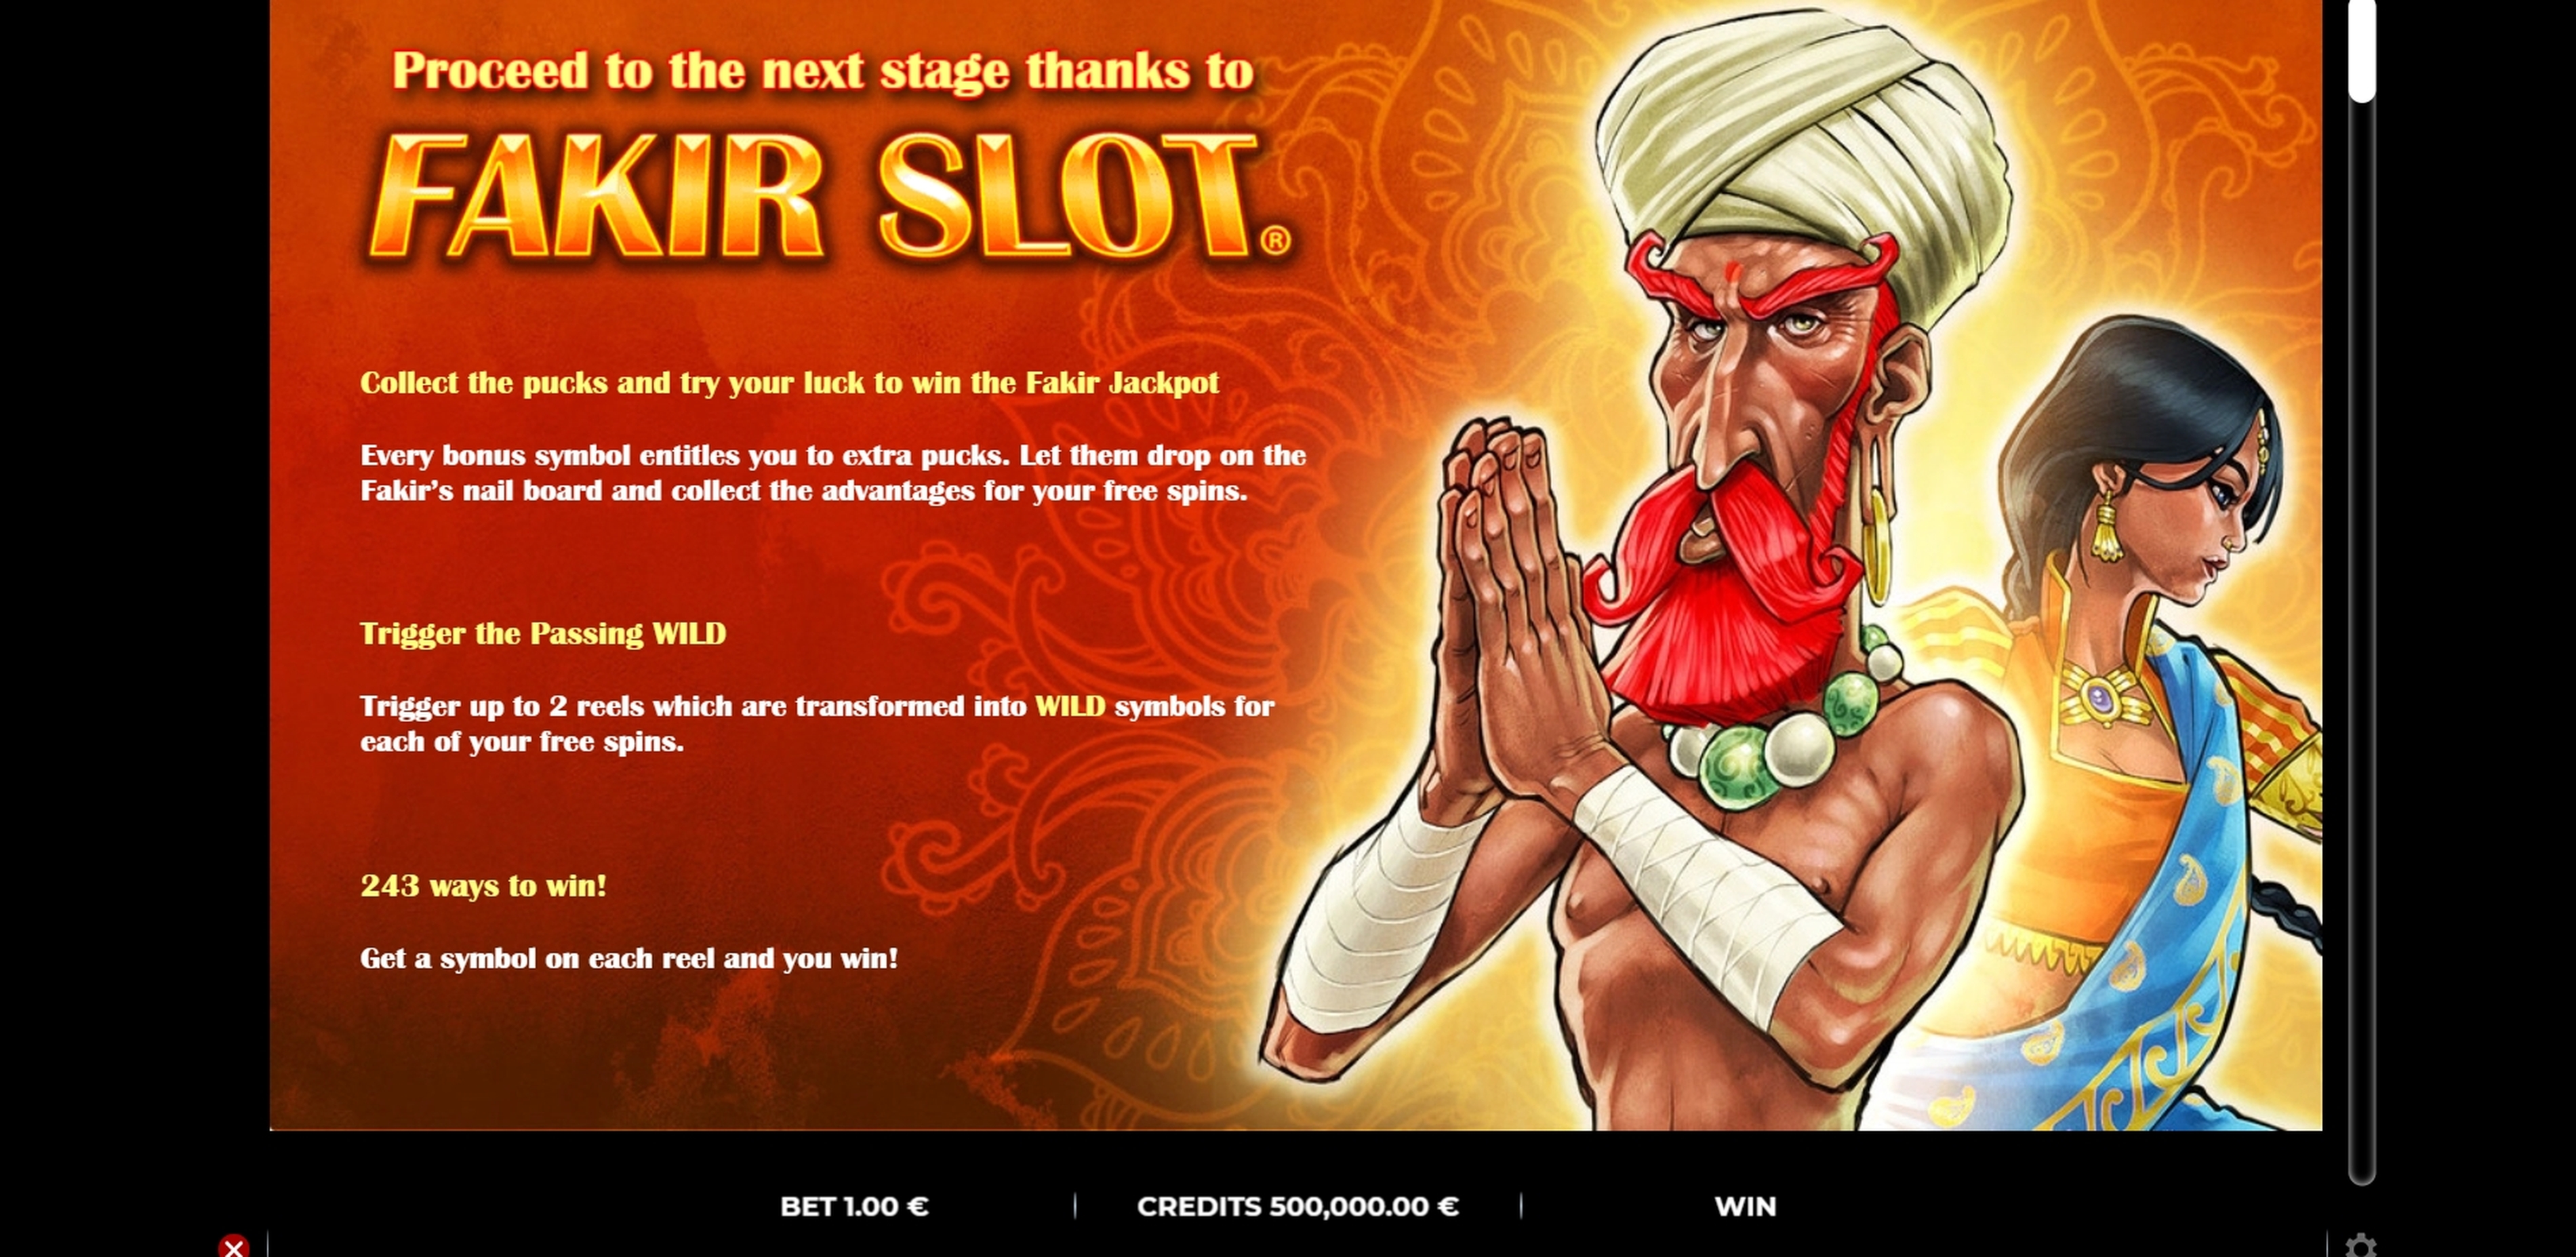 Info of Fakir Slot Slot Game by GAMING1